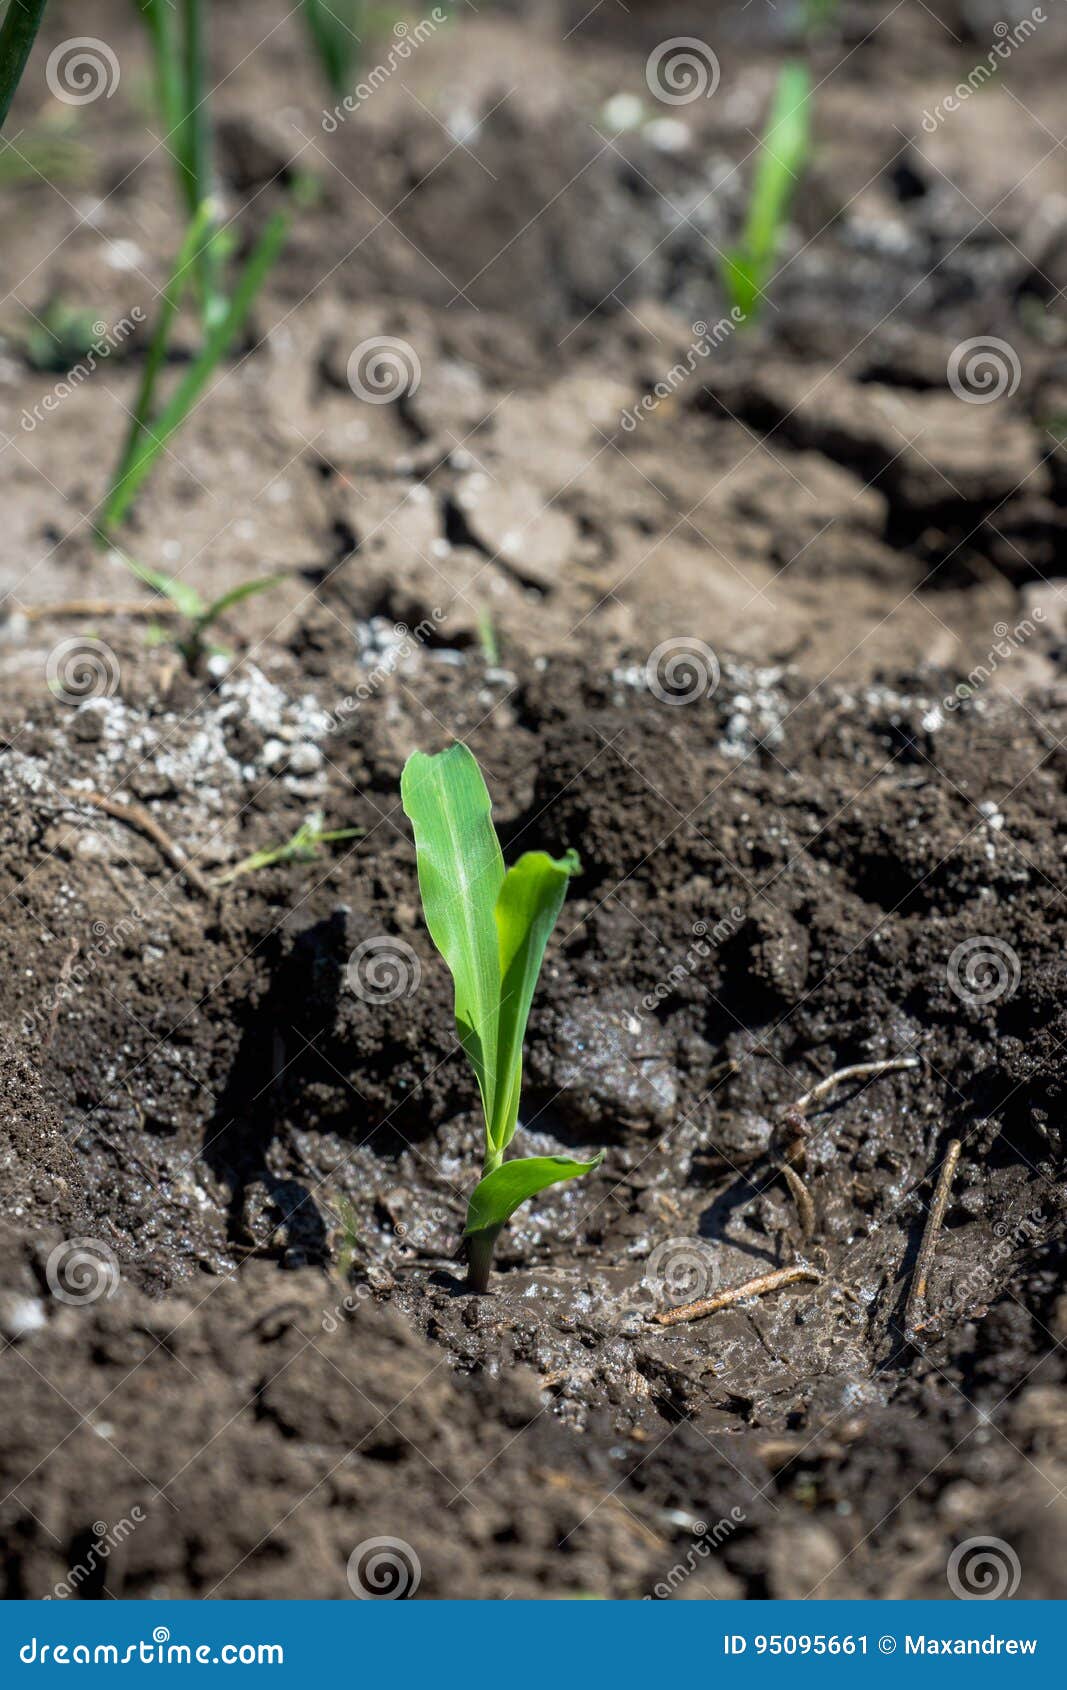 Planting Corn On The Garden Bed Stock Image Image Of Life Plant